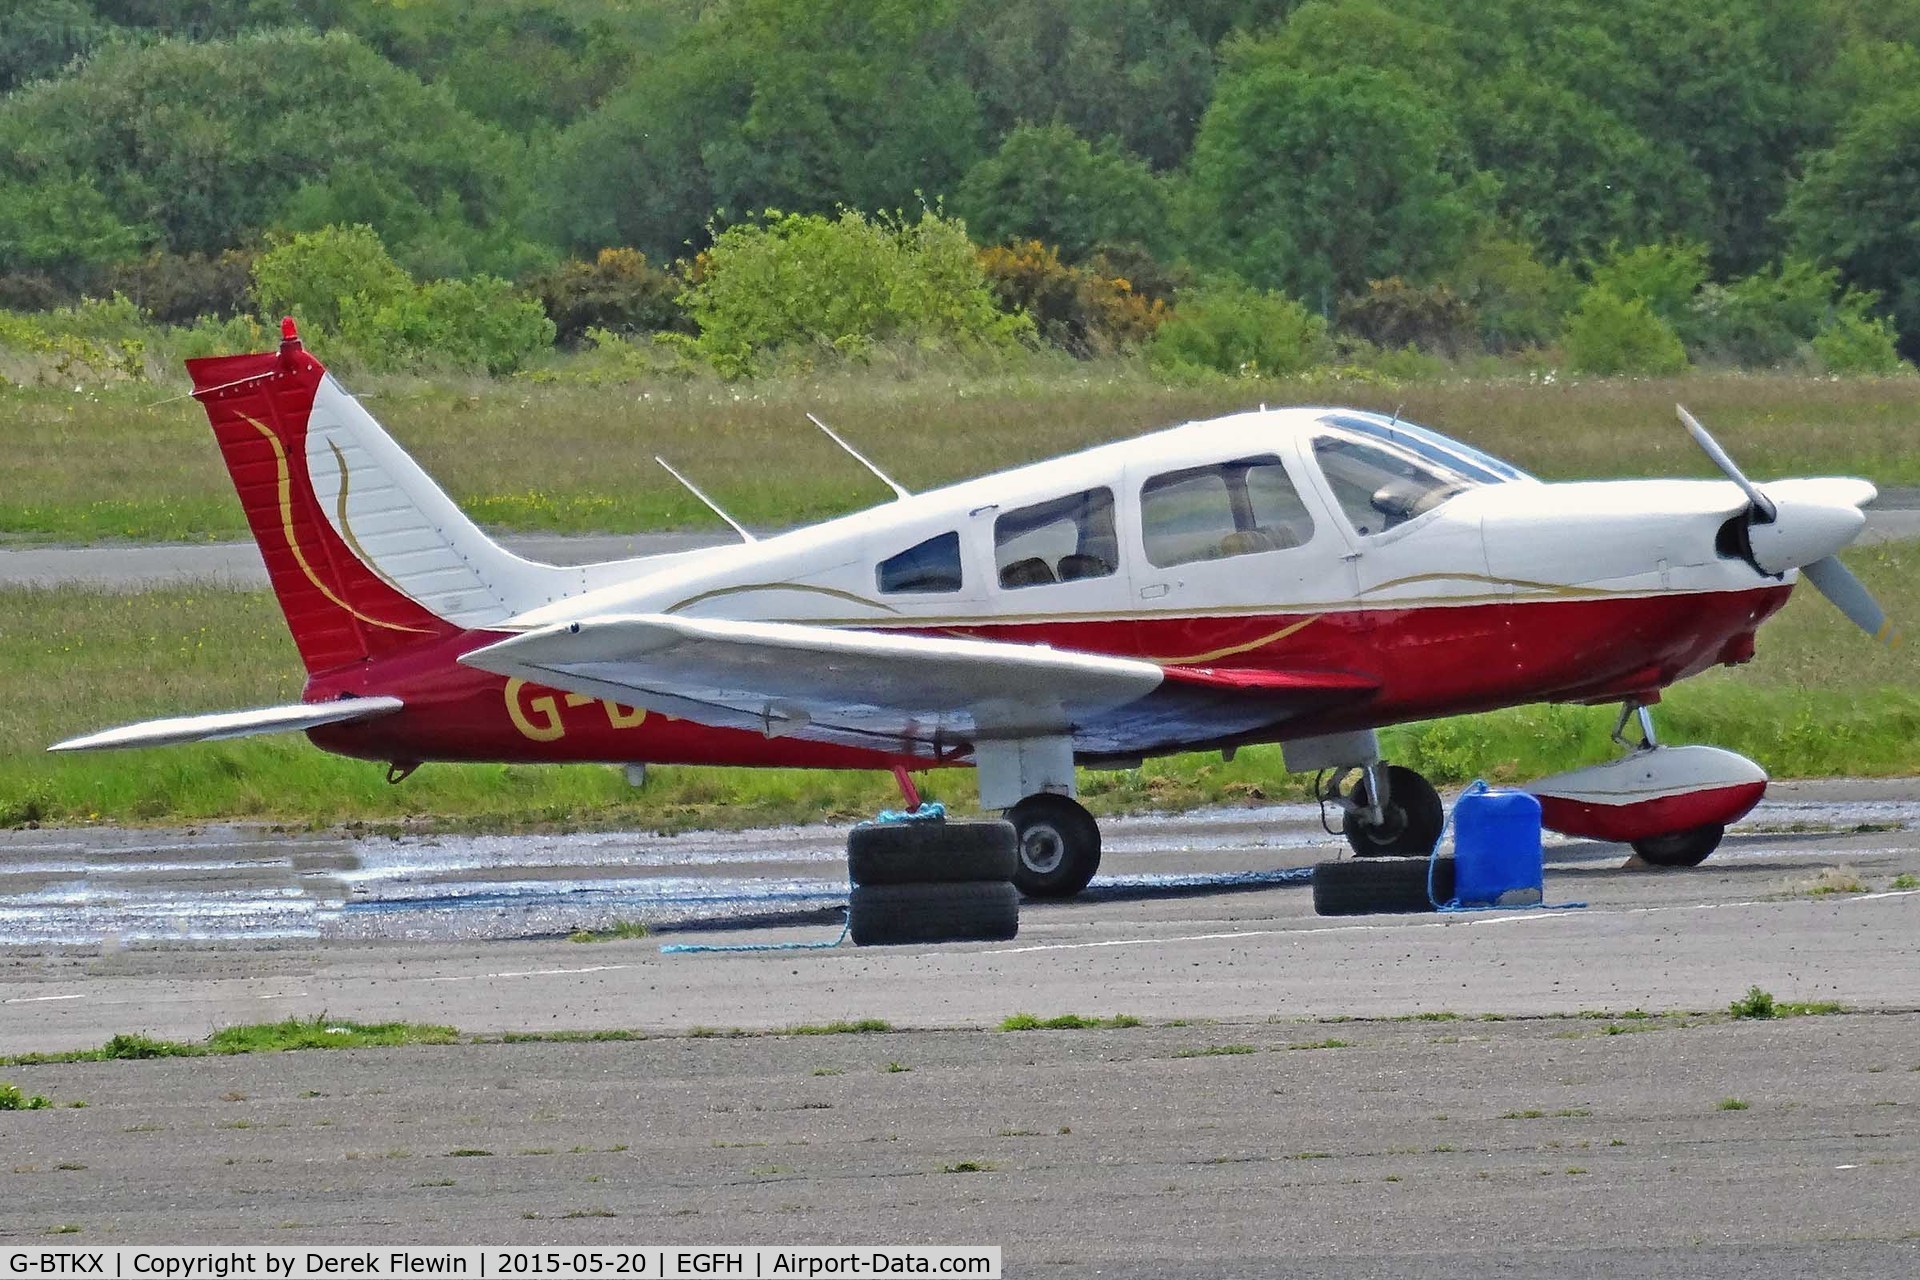 G-BTKX, 1978 Piper PA-28-181 Cherokee Archer II C/N 28-7890146, Archer II, previously N47866, Eaglescott based, seen parked up.